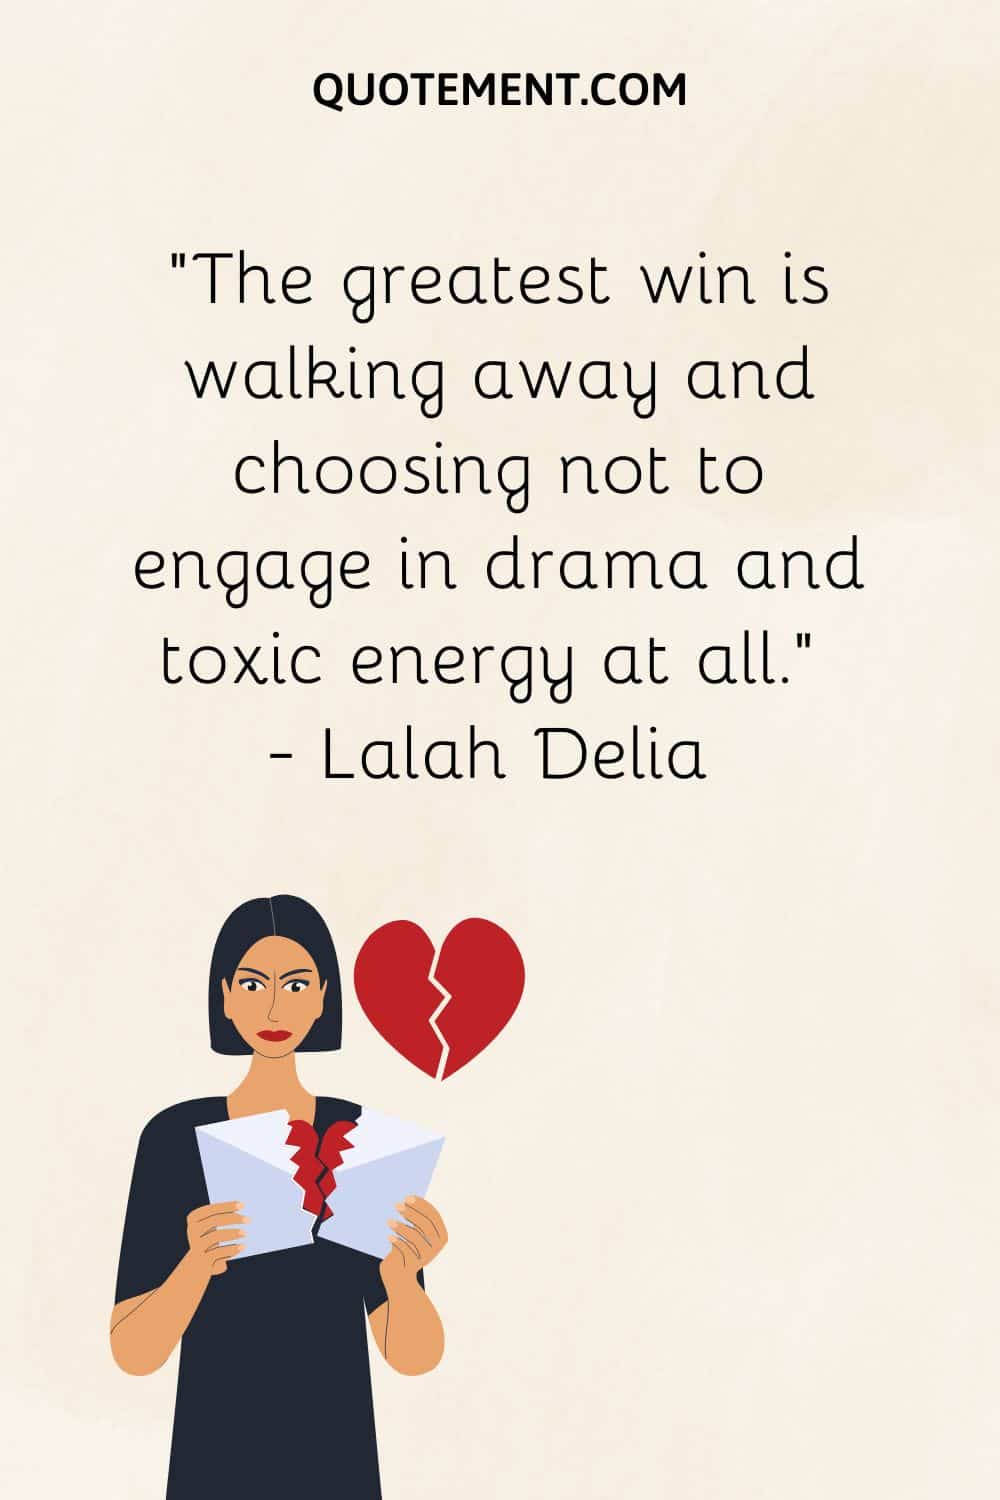 The greatest win is walking away and choosing not to engage in drama and toxic energy at all